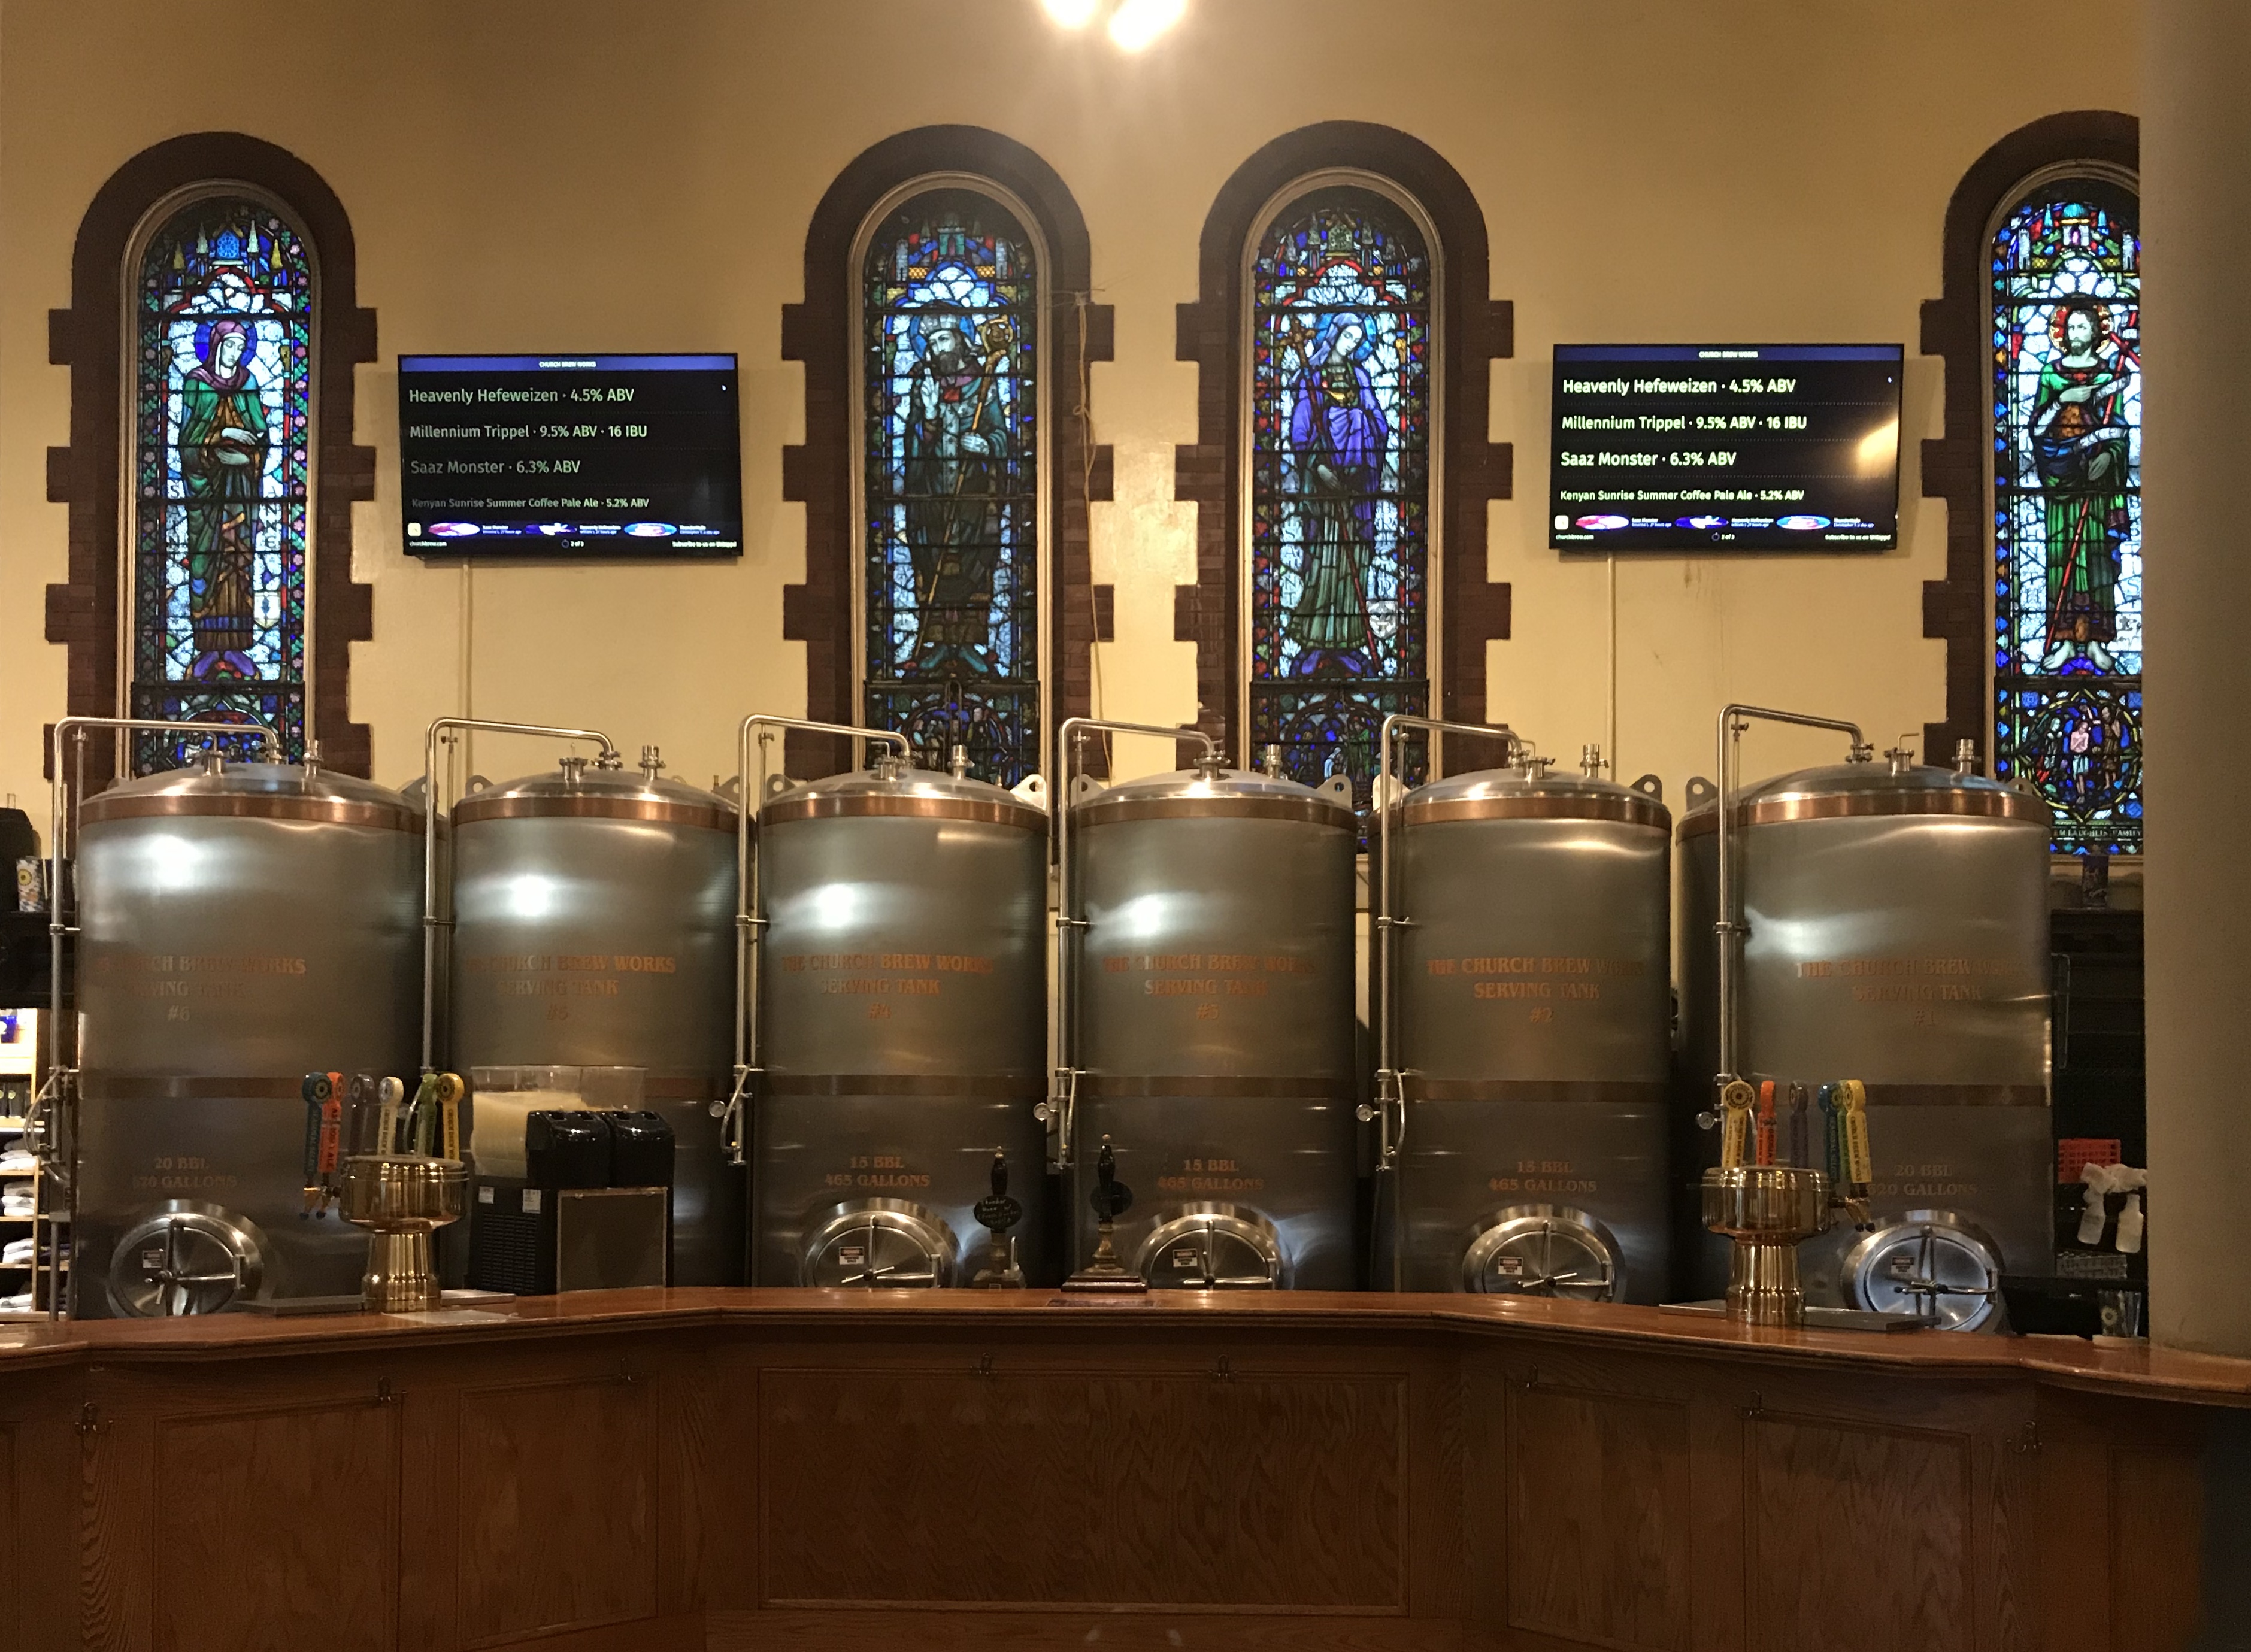 beer brewing set up in the pews in front of stained glass windows depicting mary and jesus